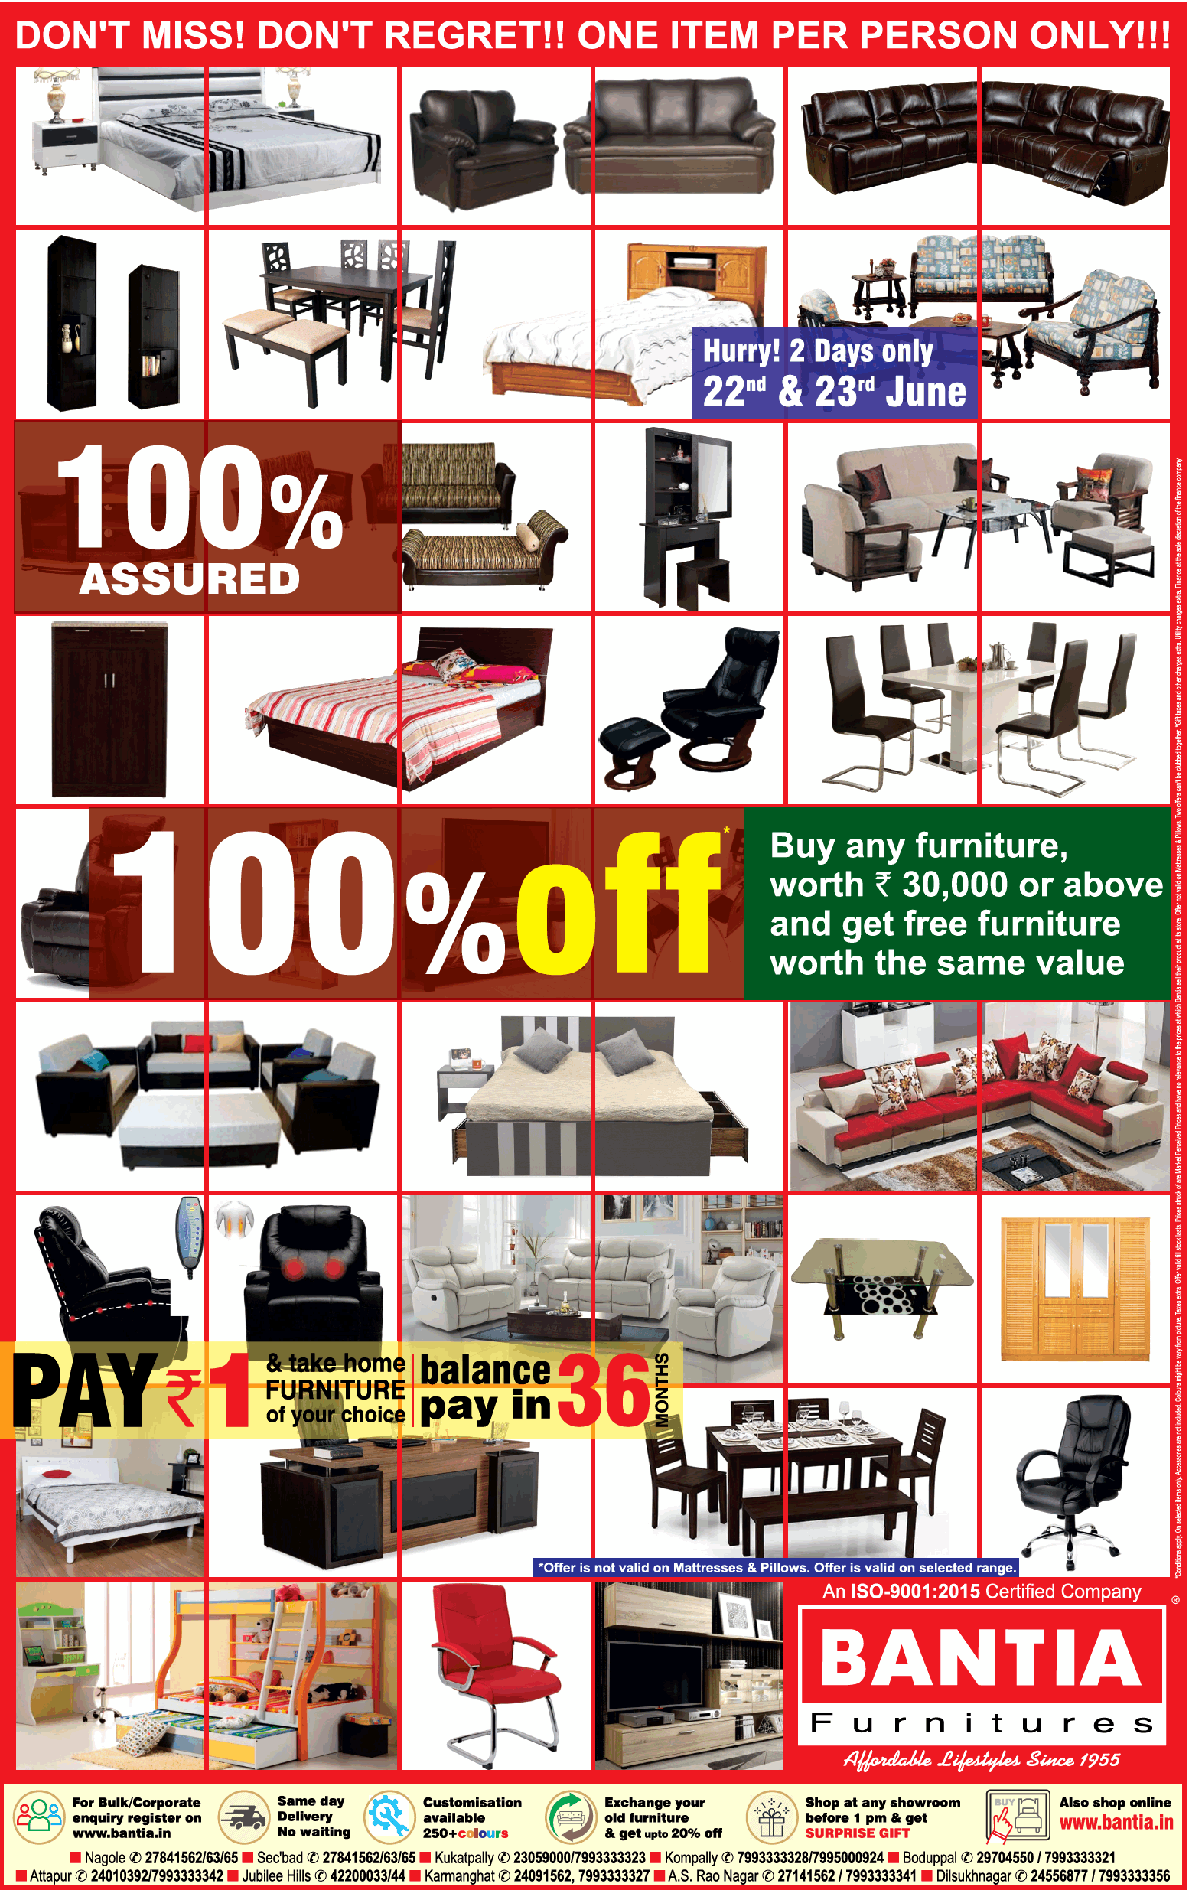 bantia-furnitures-pay-rs-1-and-take-any-furniture-ad-hyderabad-times-22-06-2019.png